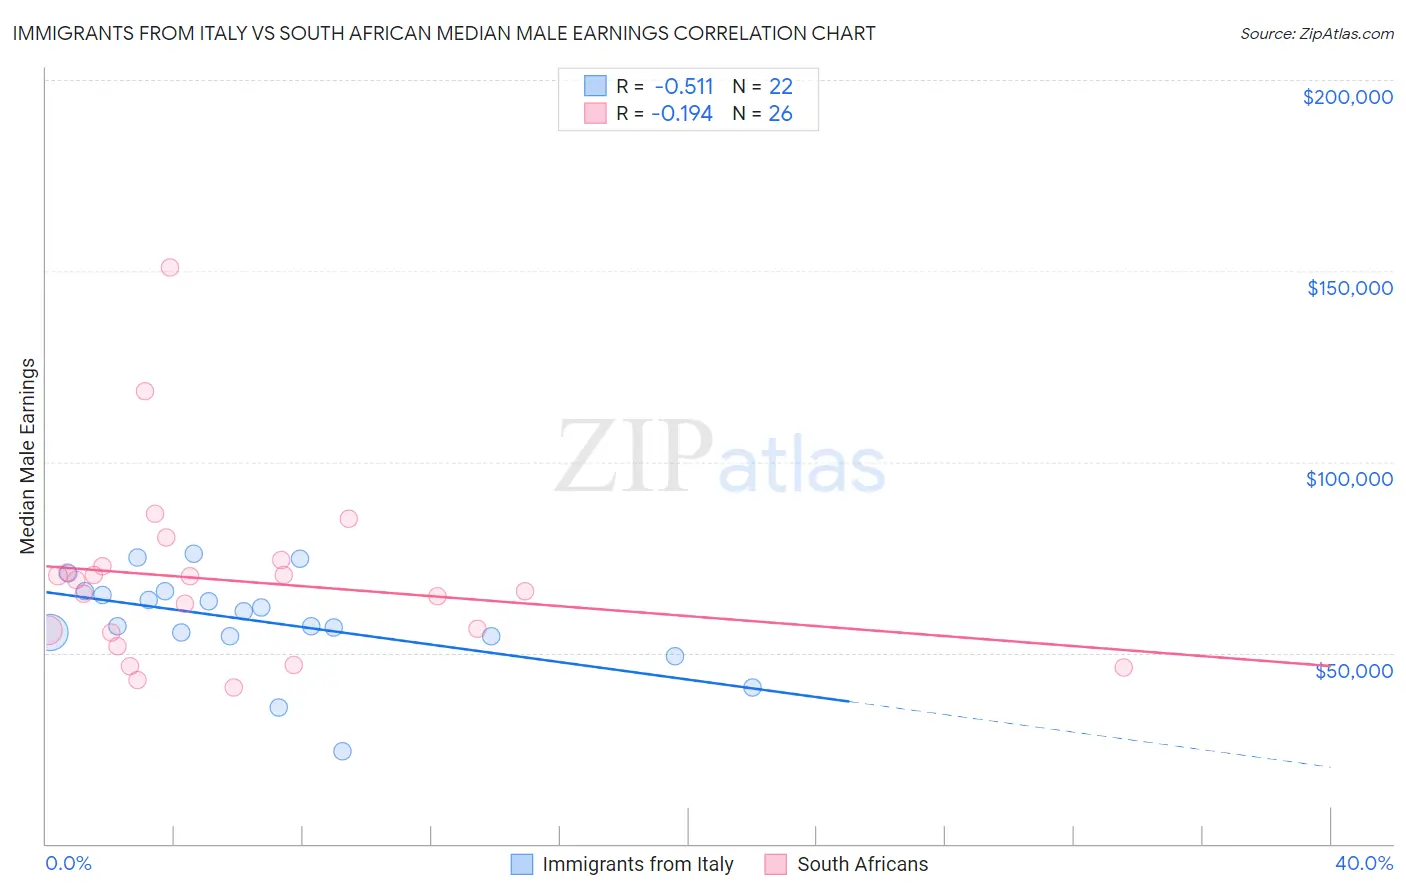 Immigrants from Italy vs South African Median Male Earnings